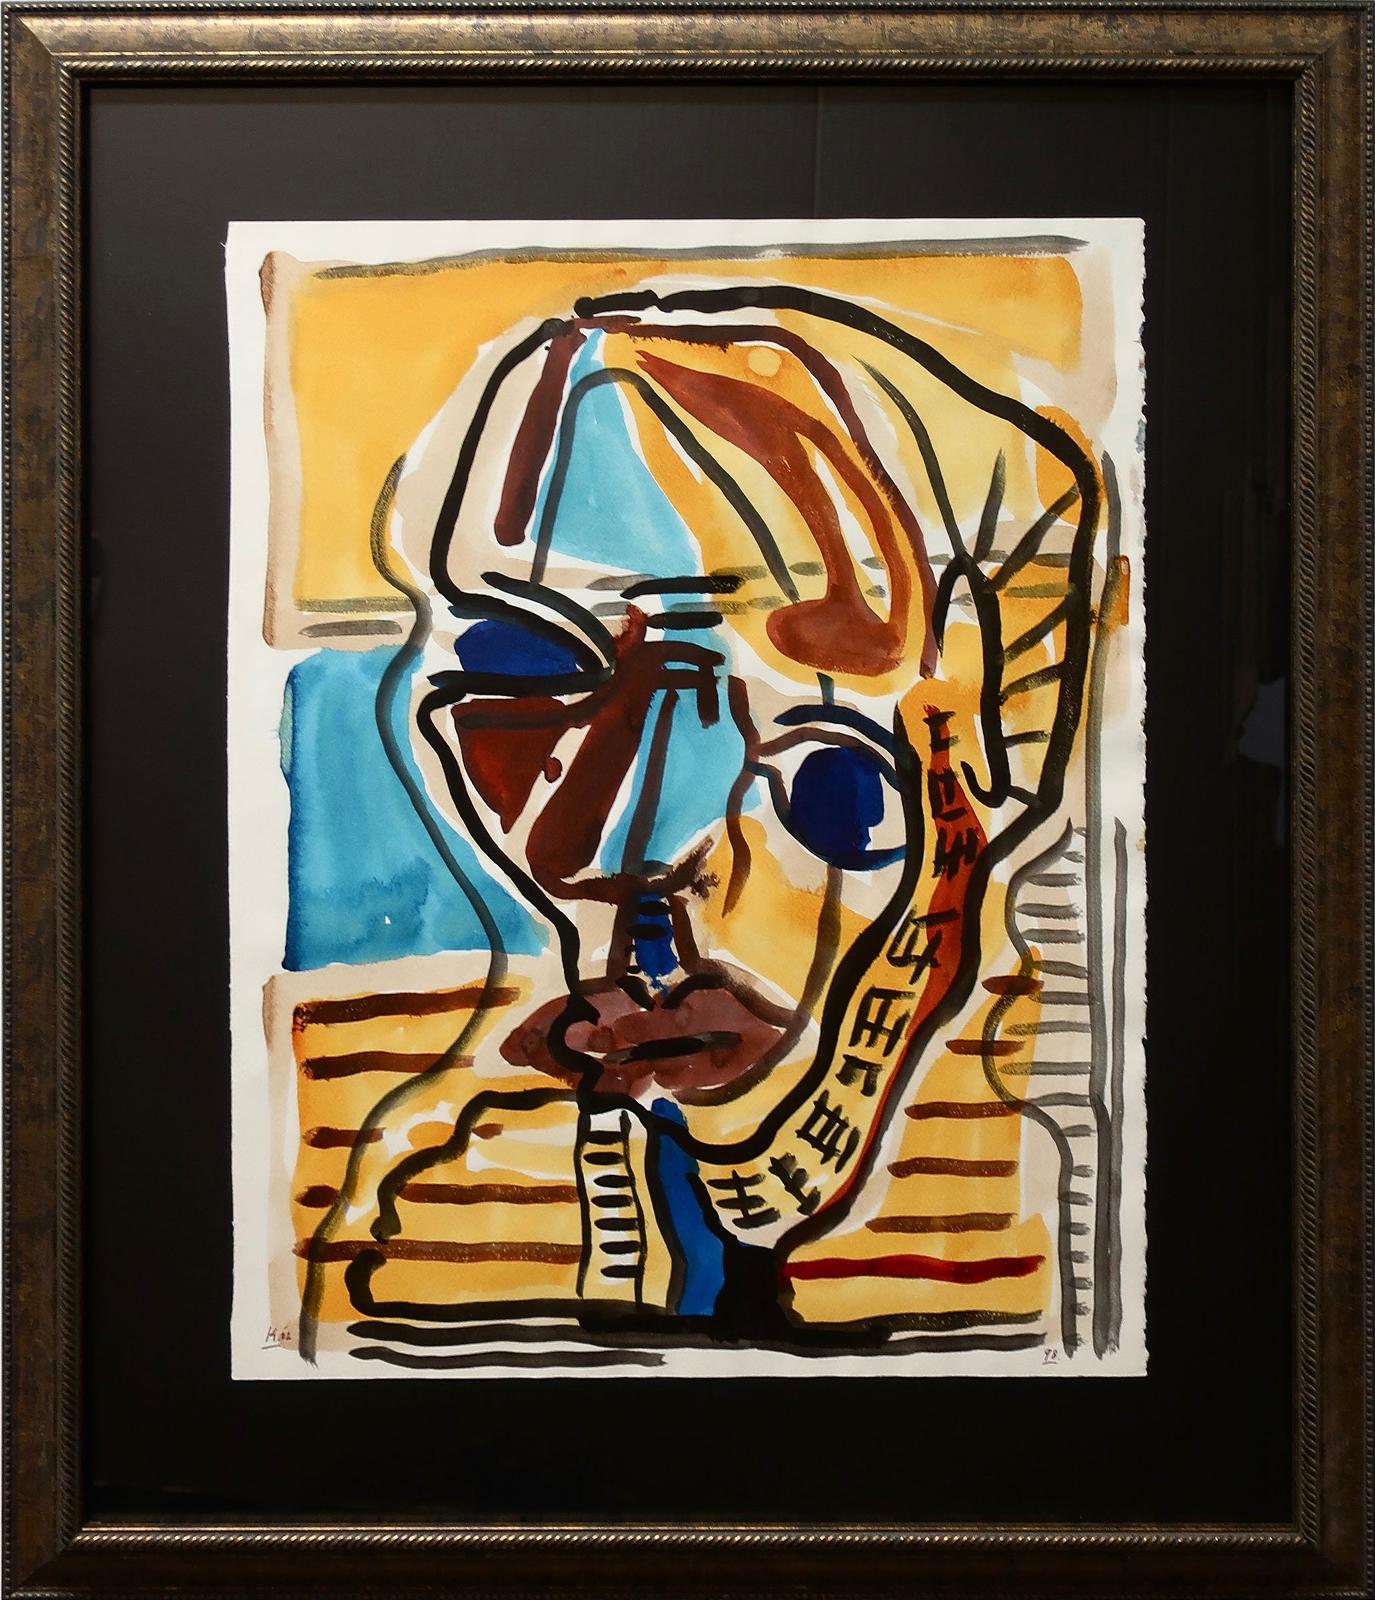 Harold Klunder (1943) - Untitled (Abstract Portrait)